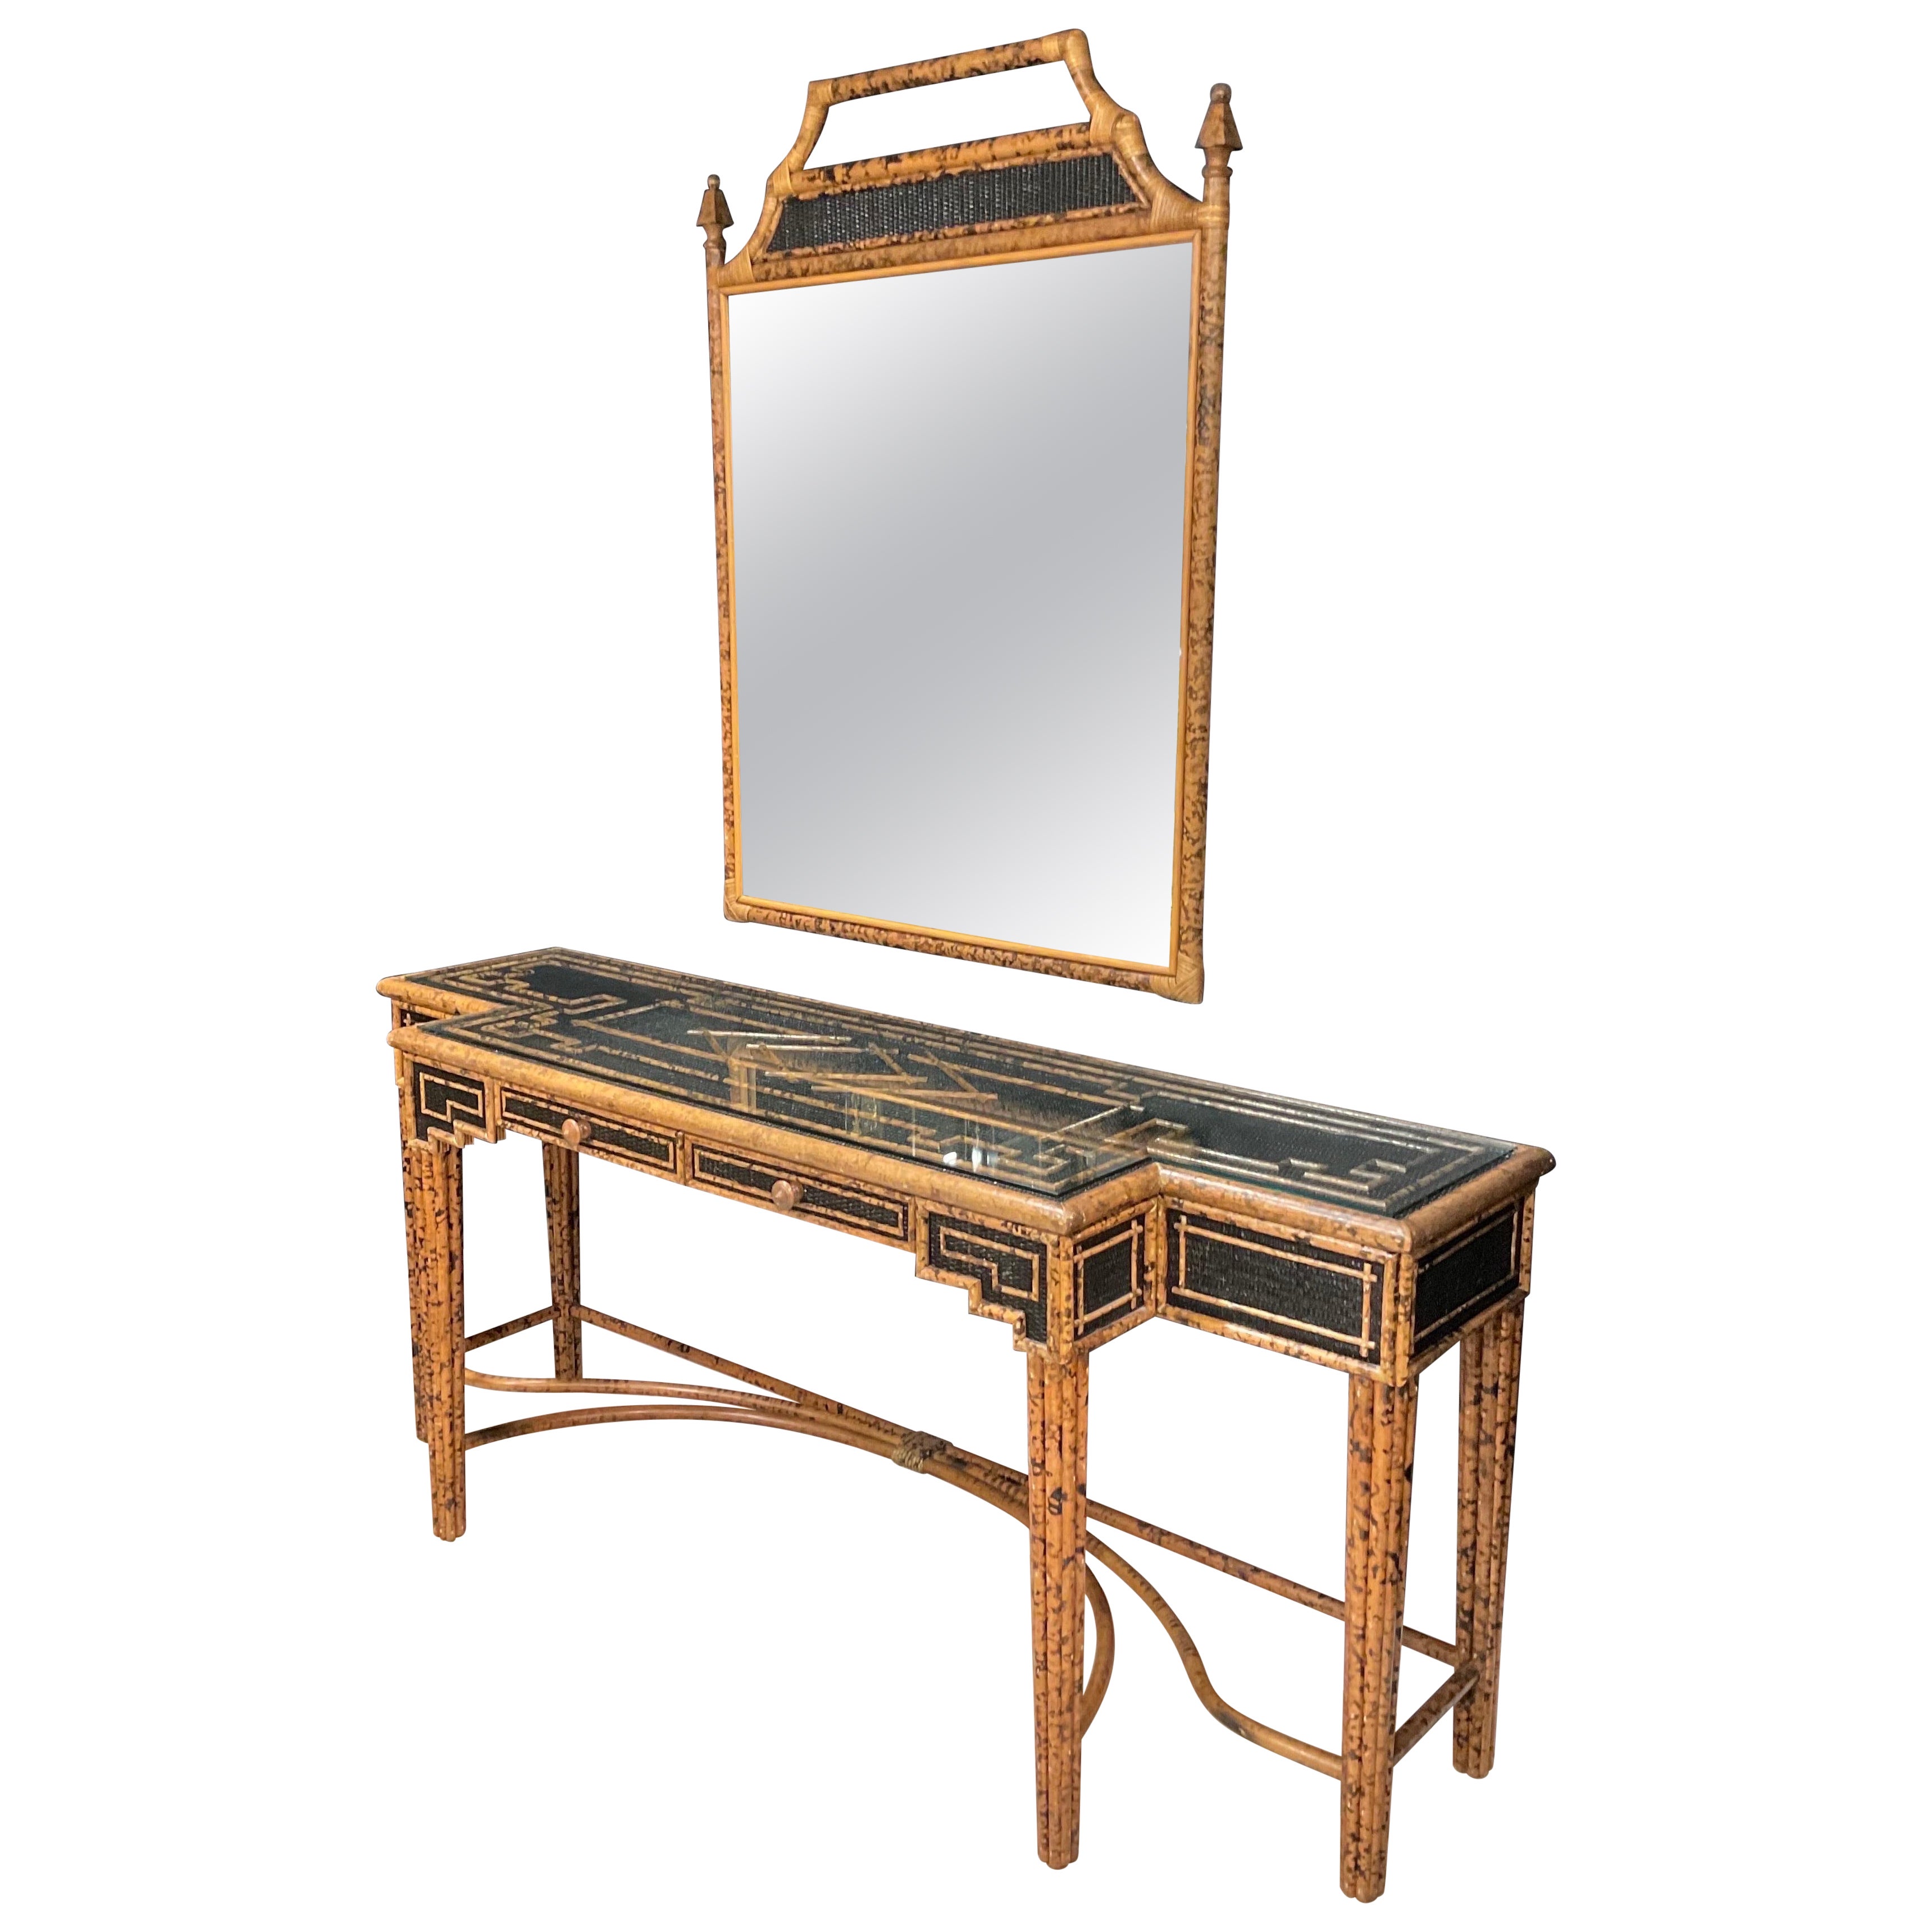 1970s Faux Tortoiseshell Ratan and Bamboo Console Table and Matching Mirror - Se